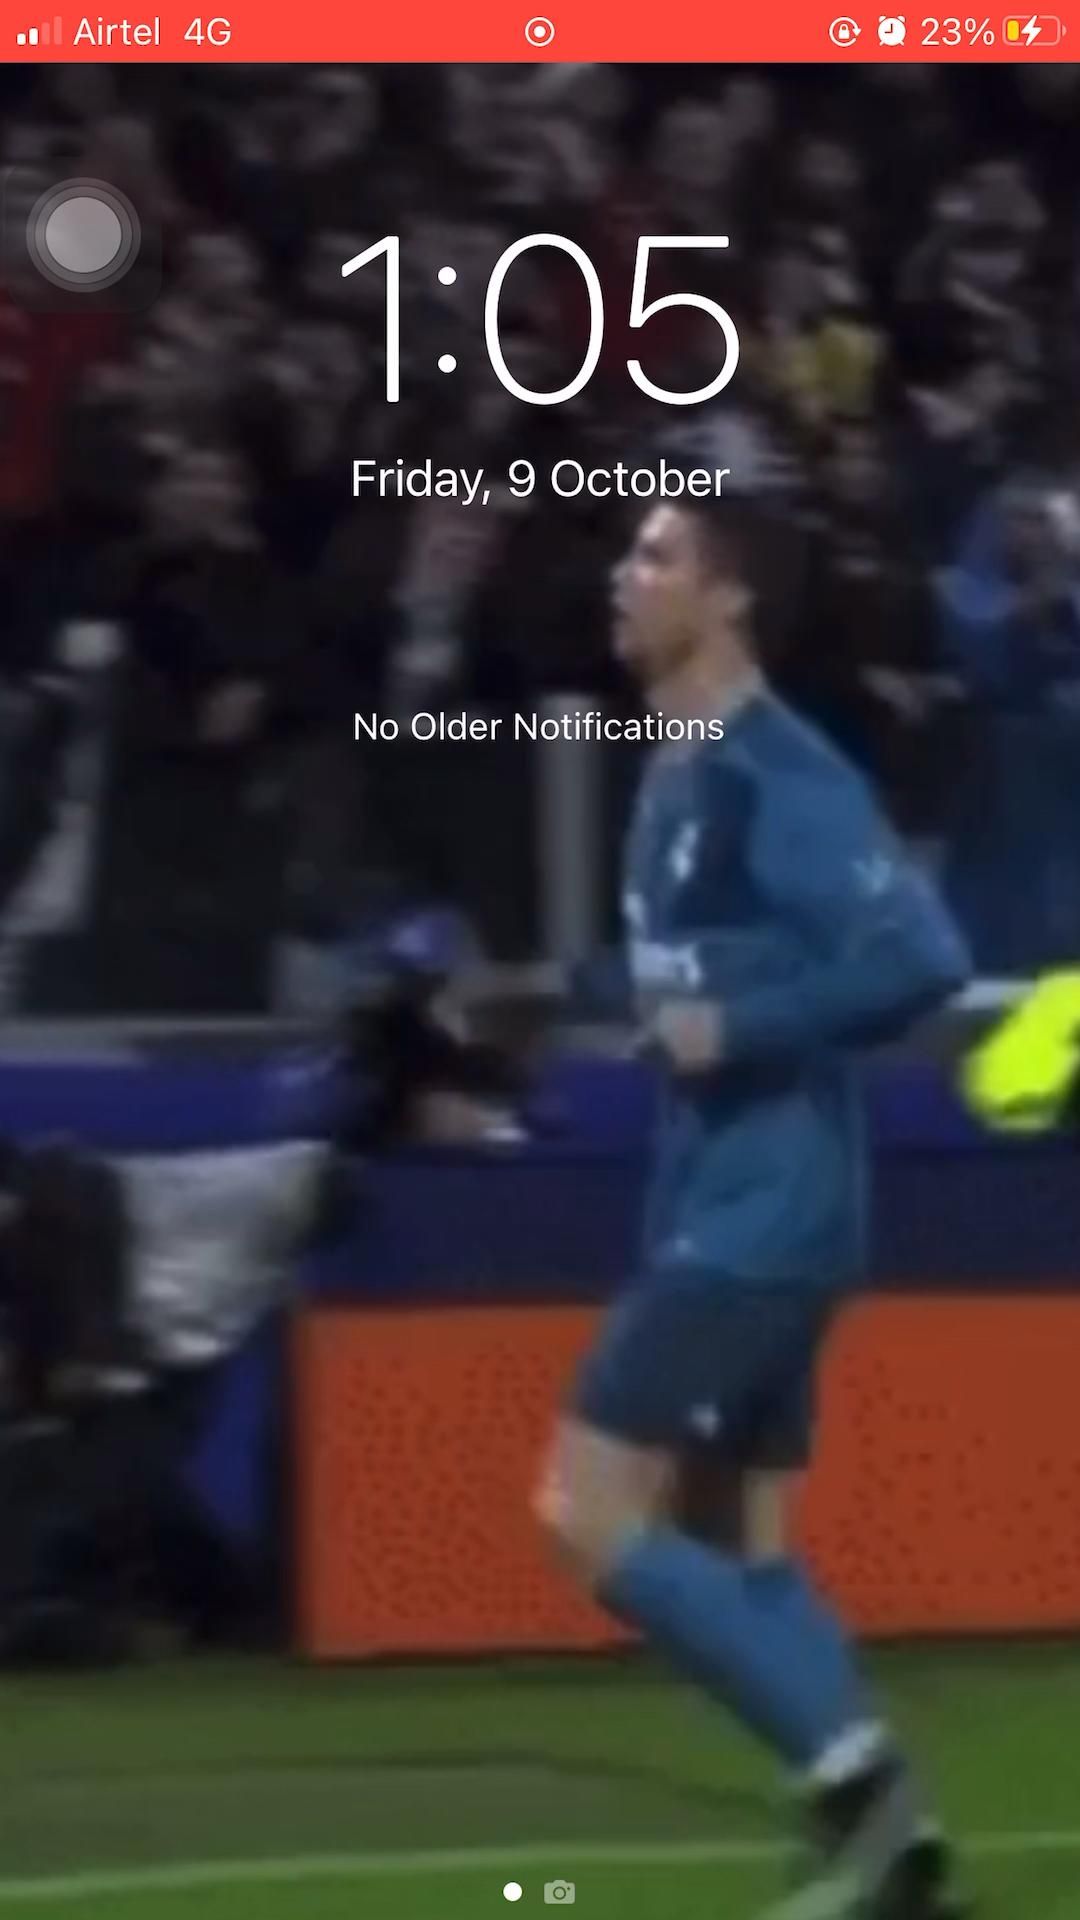 Cr7 Live Wallpapers